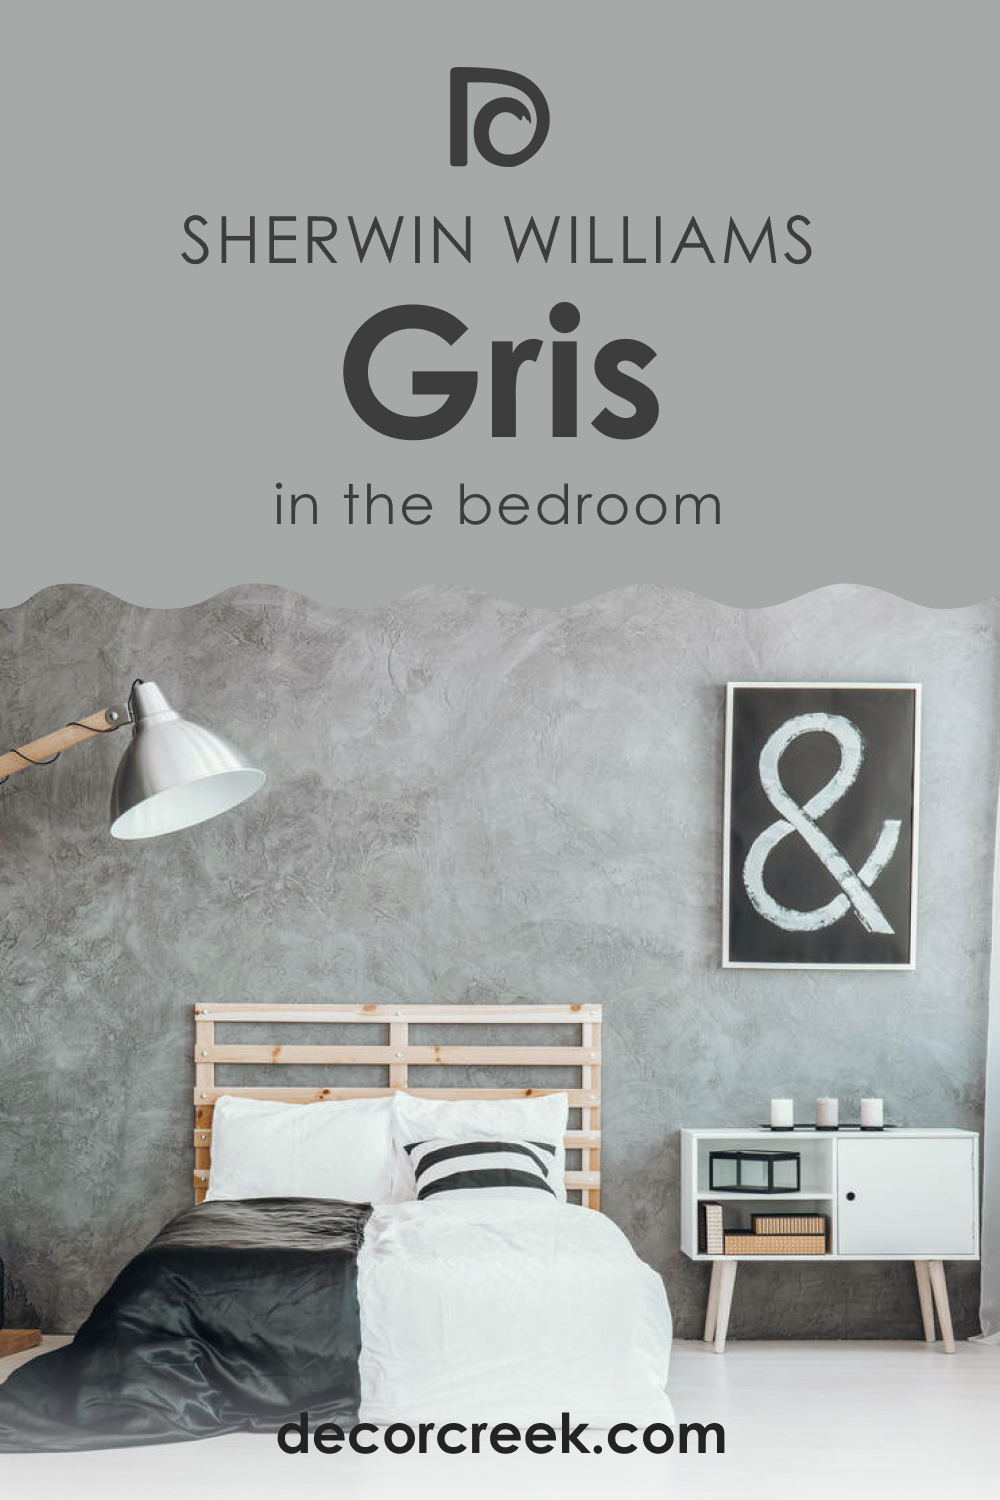 How to Use SW 7659 Gris in the Bedroom?